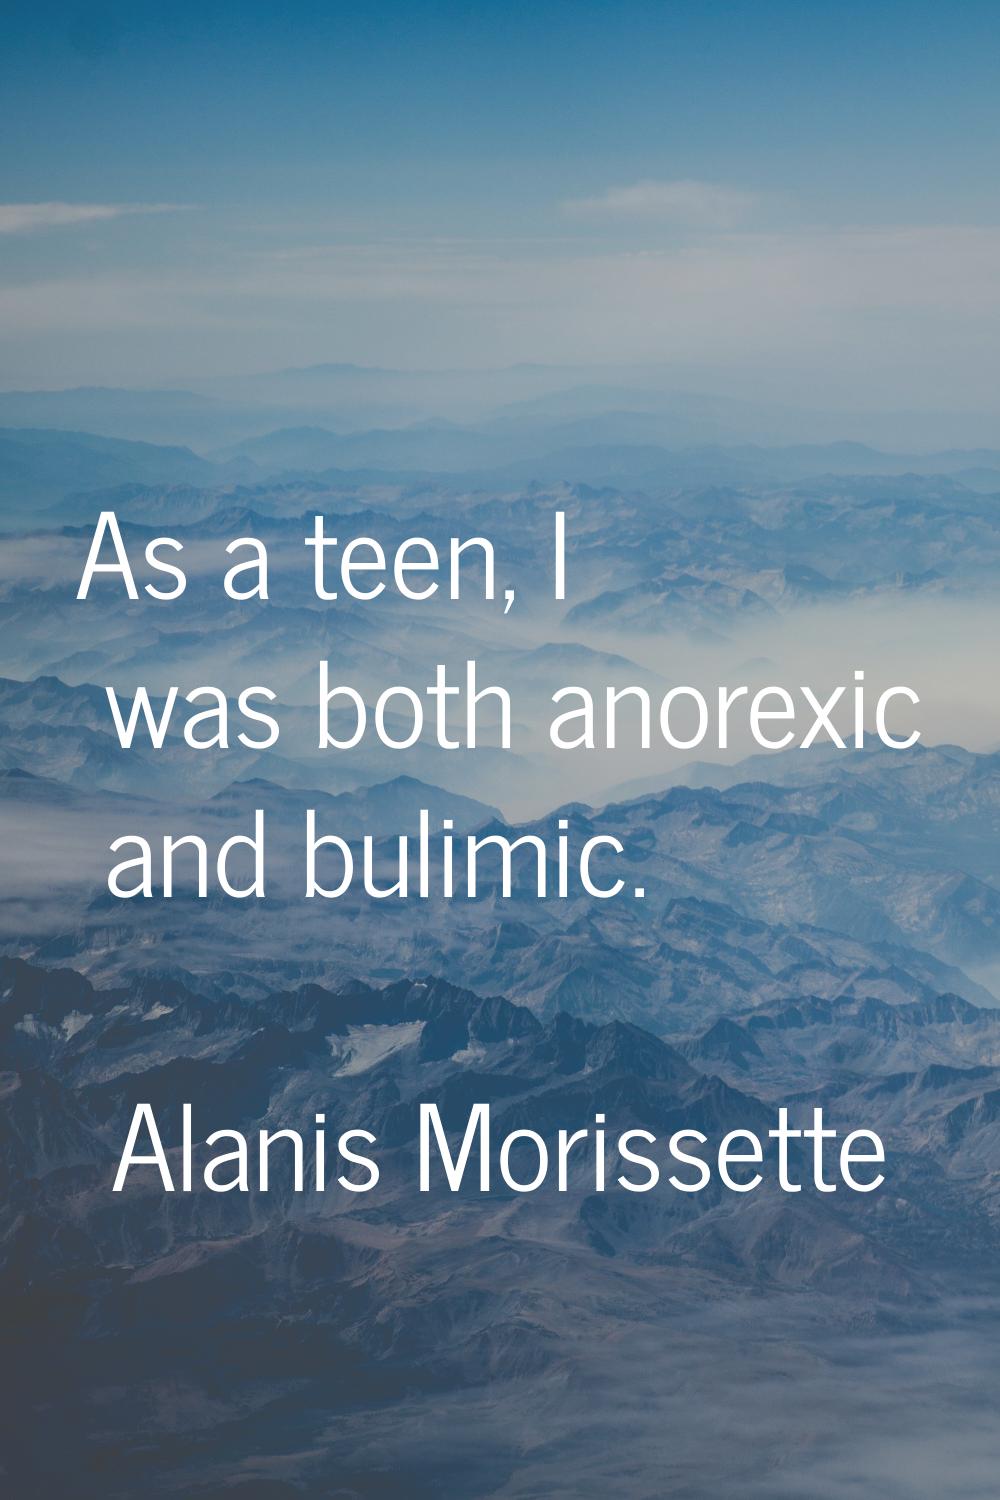 As a teen, I was both anorexic and bulimic.